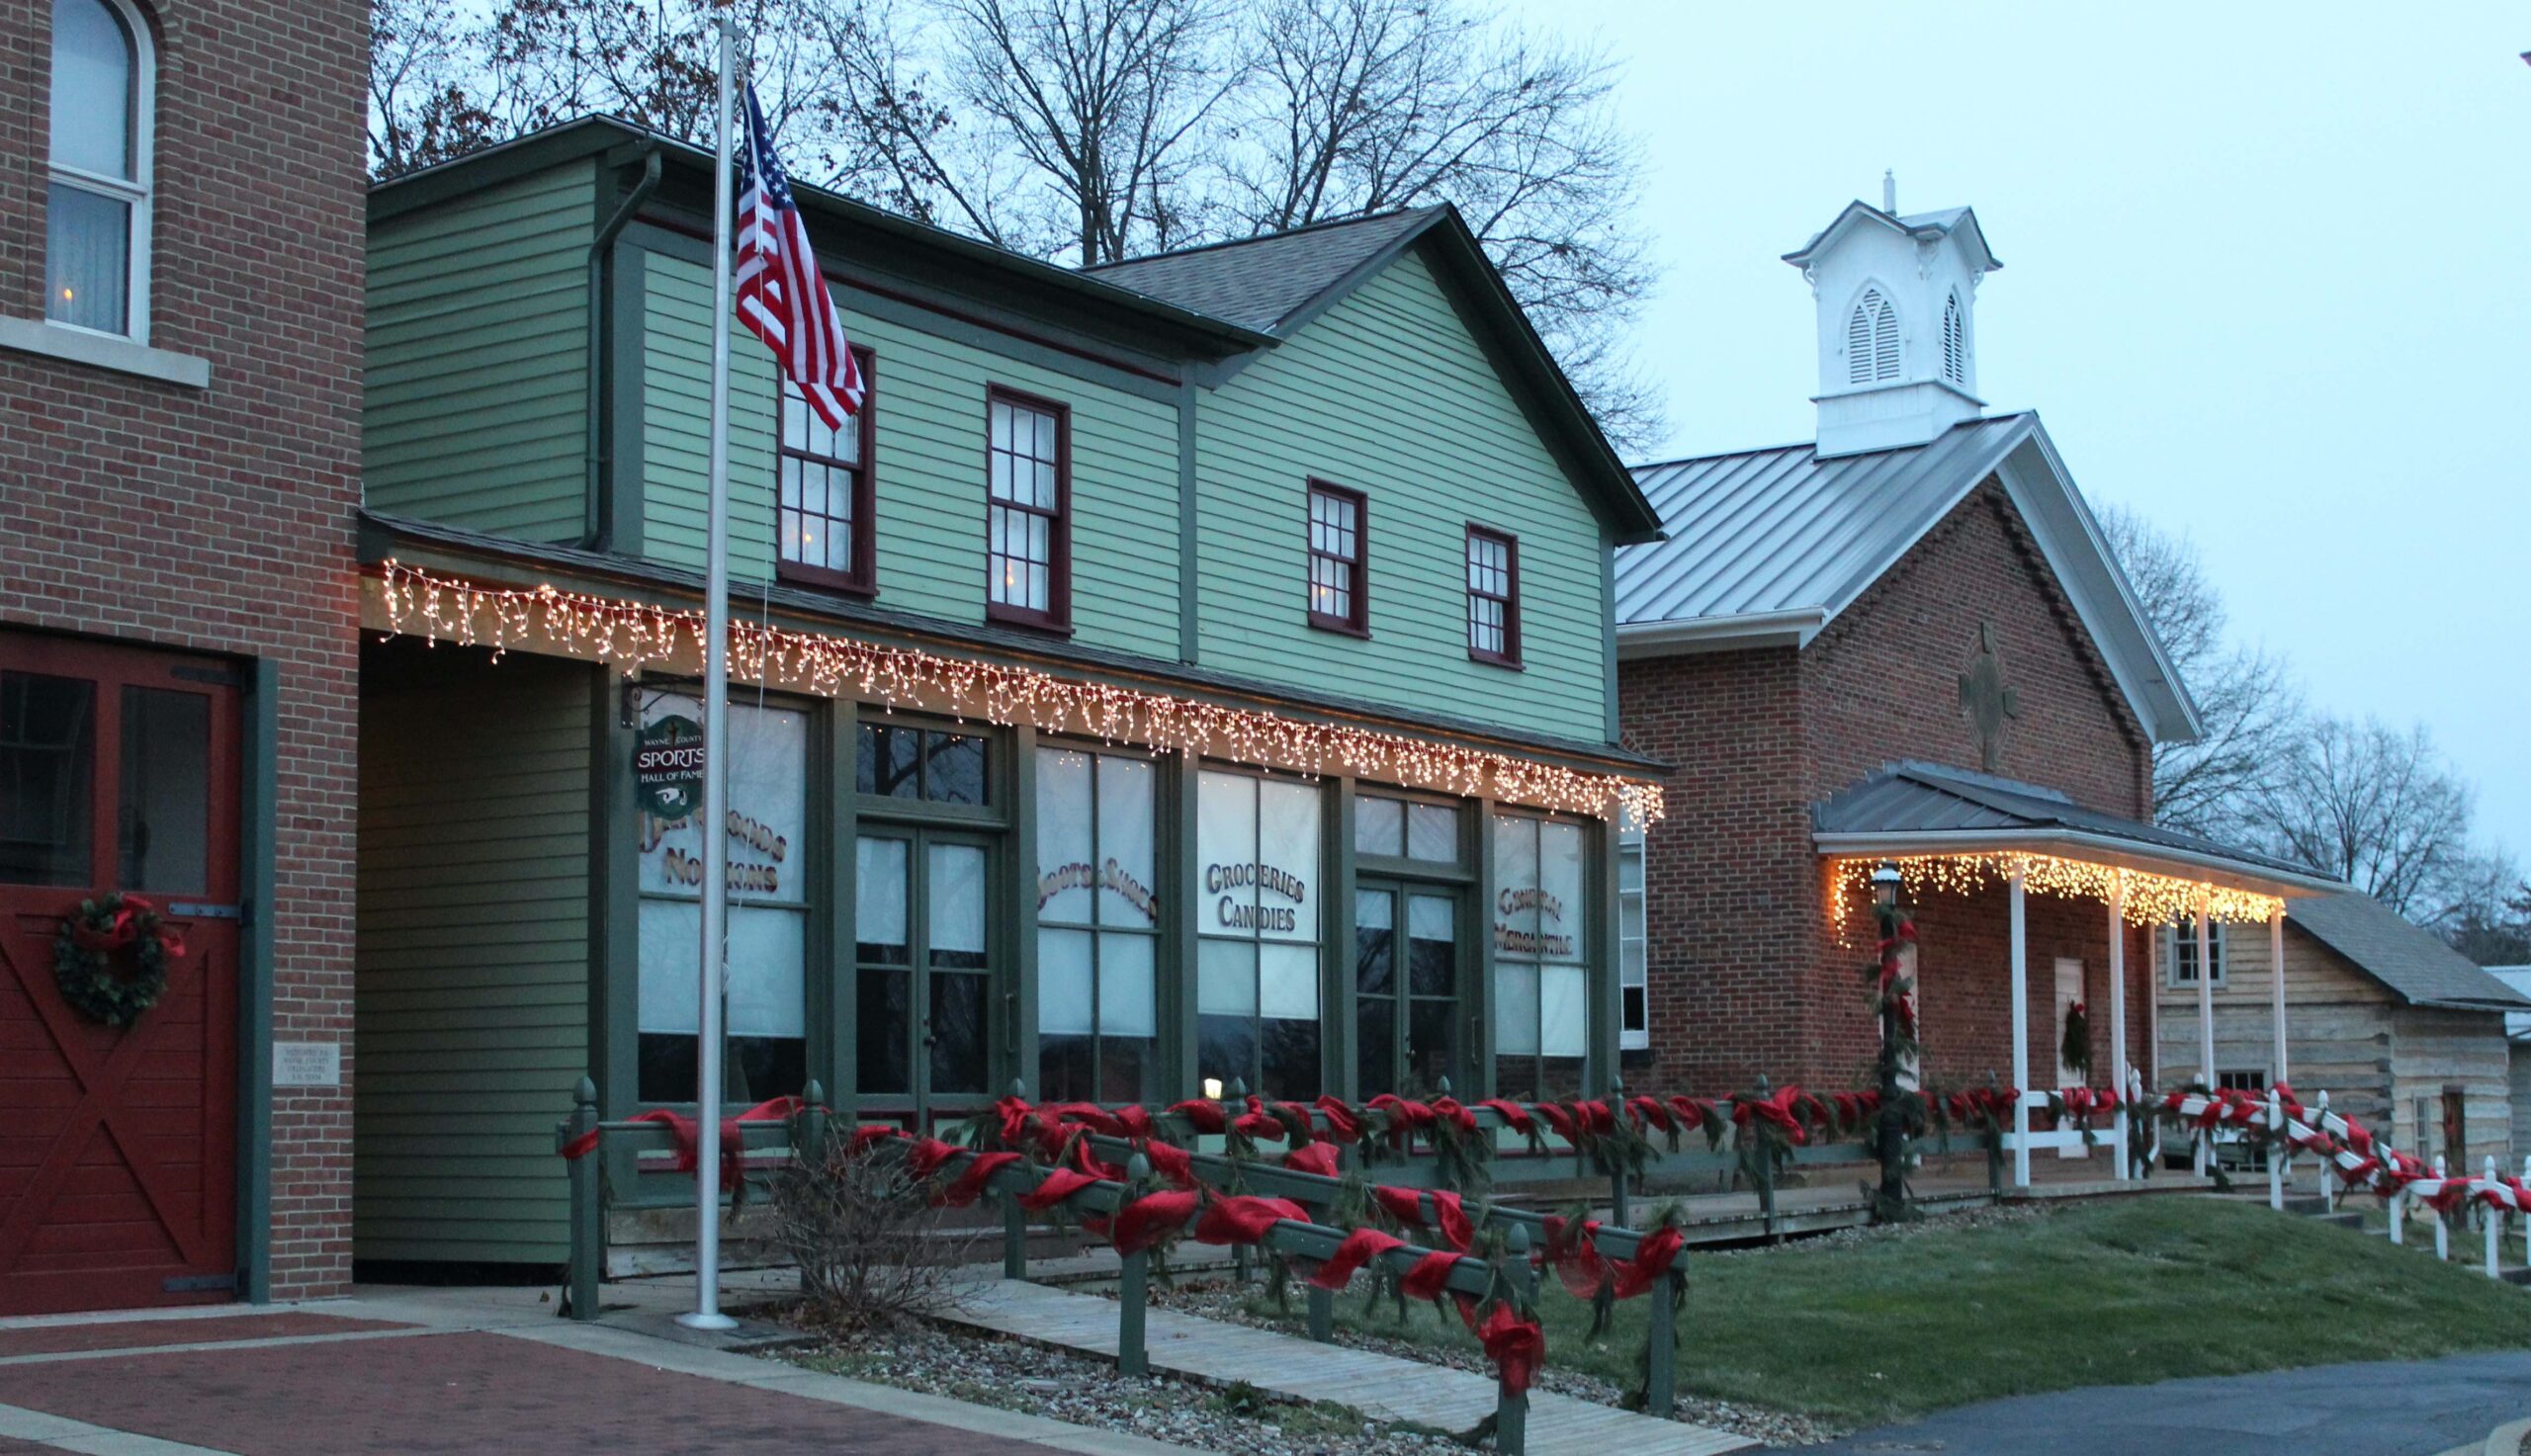 General store and schoolhouse decorated for the holidays